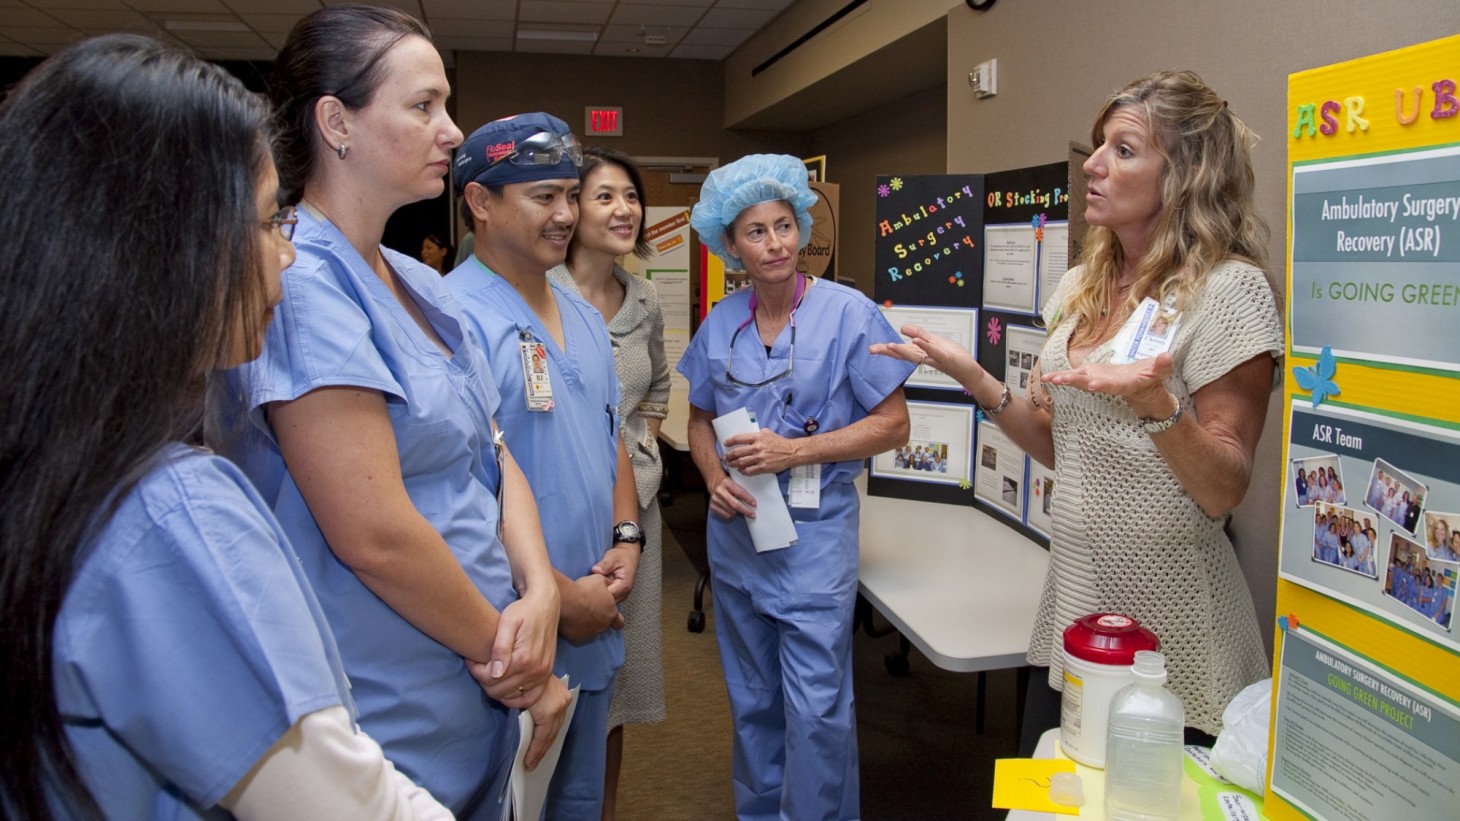 A woman explains a storyboard to several nurses gathered around her